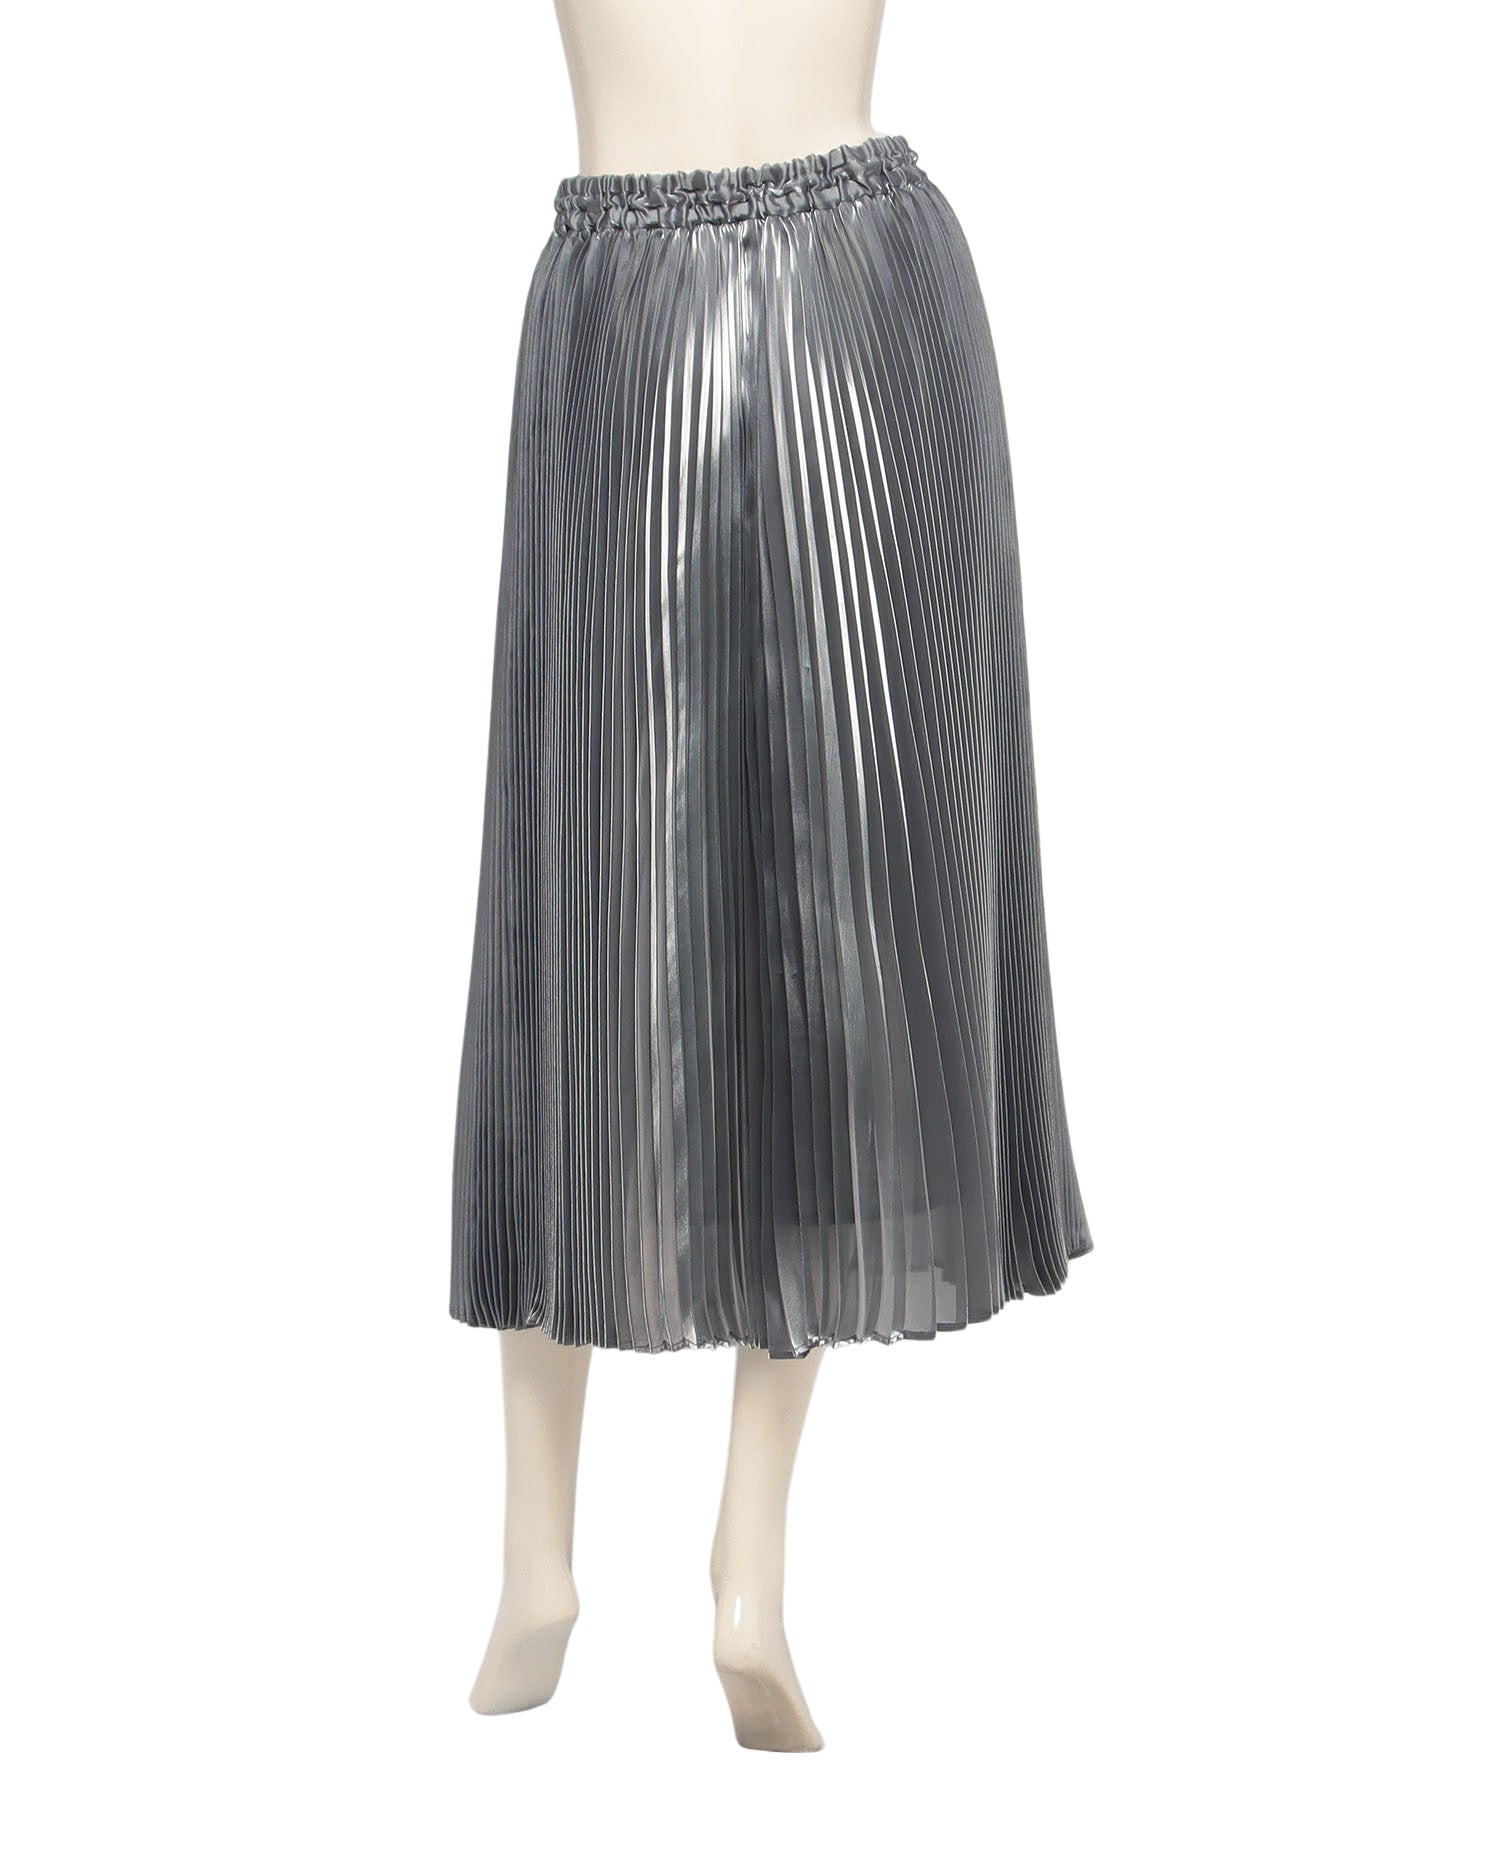 [Sales for limited quantity] Bright chambray pleated skirt